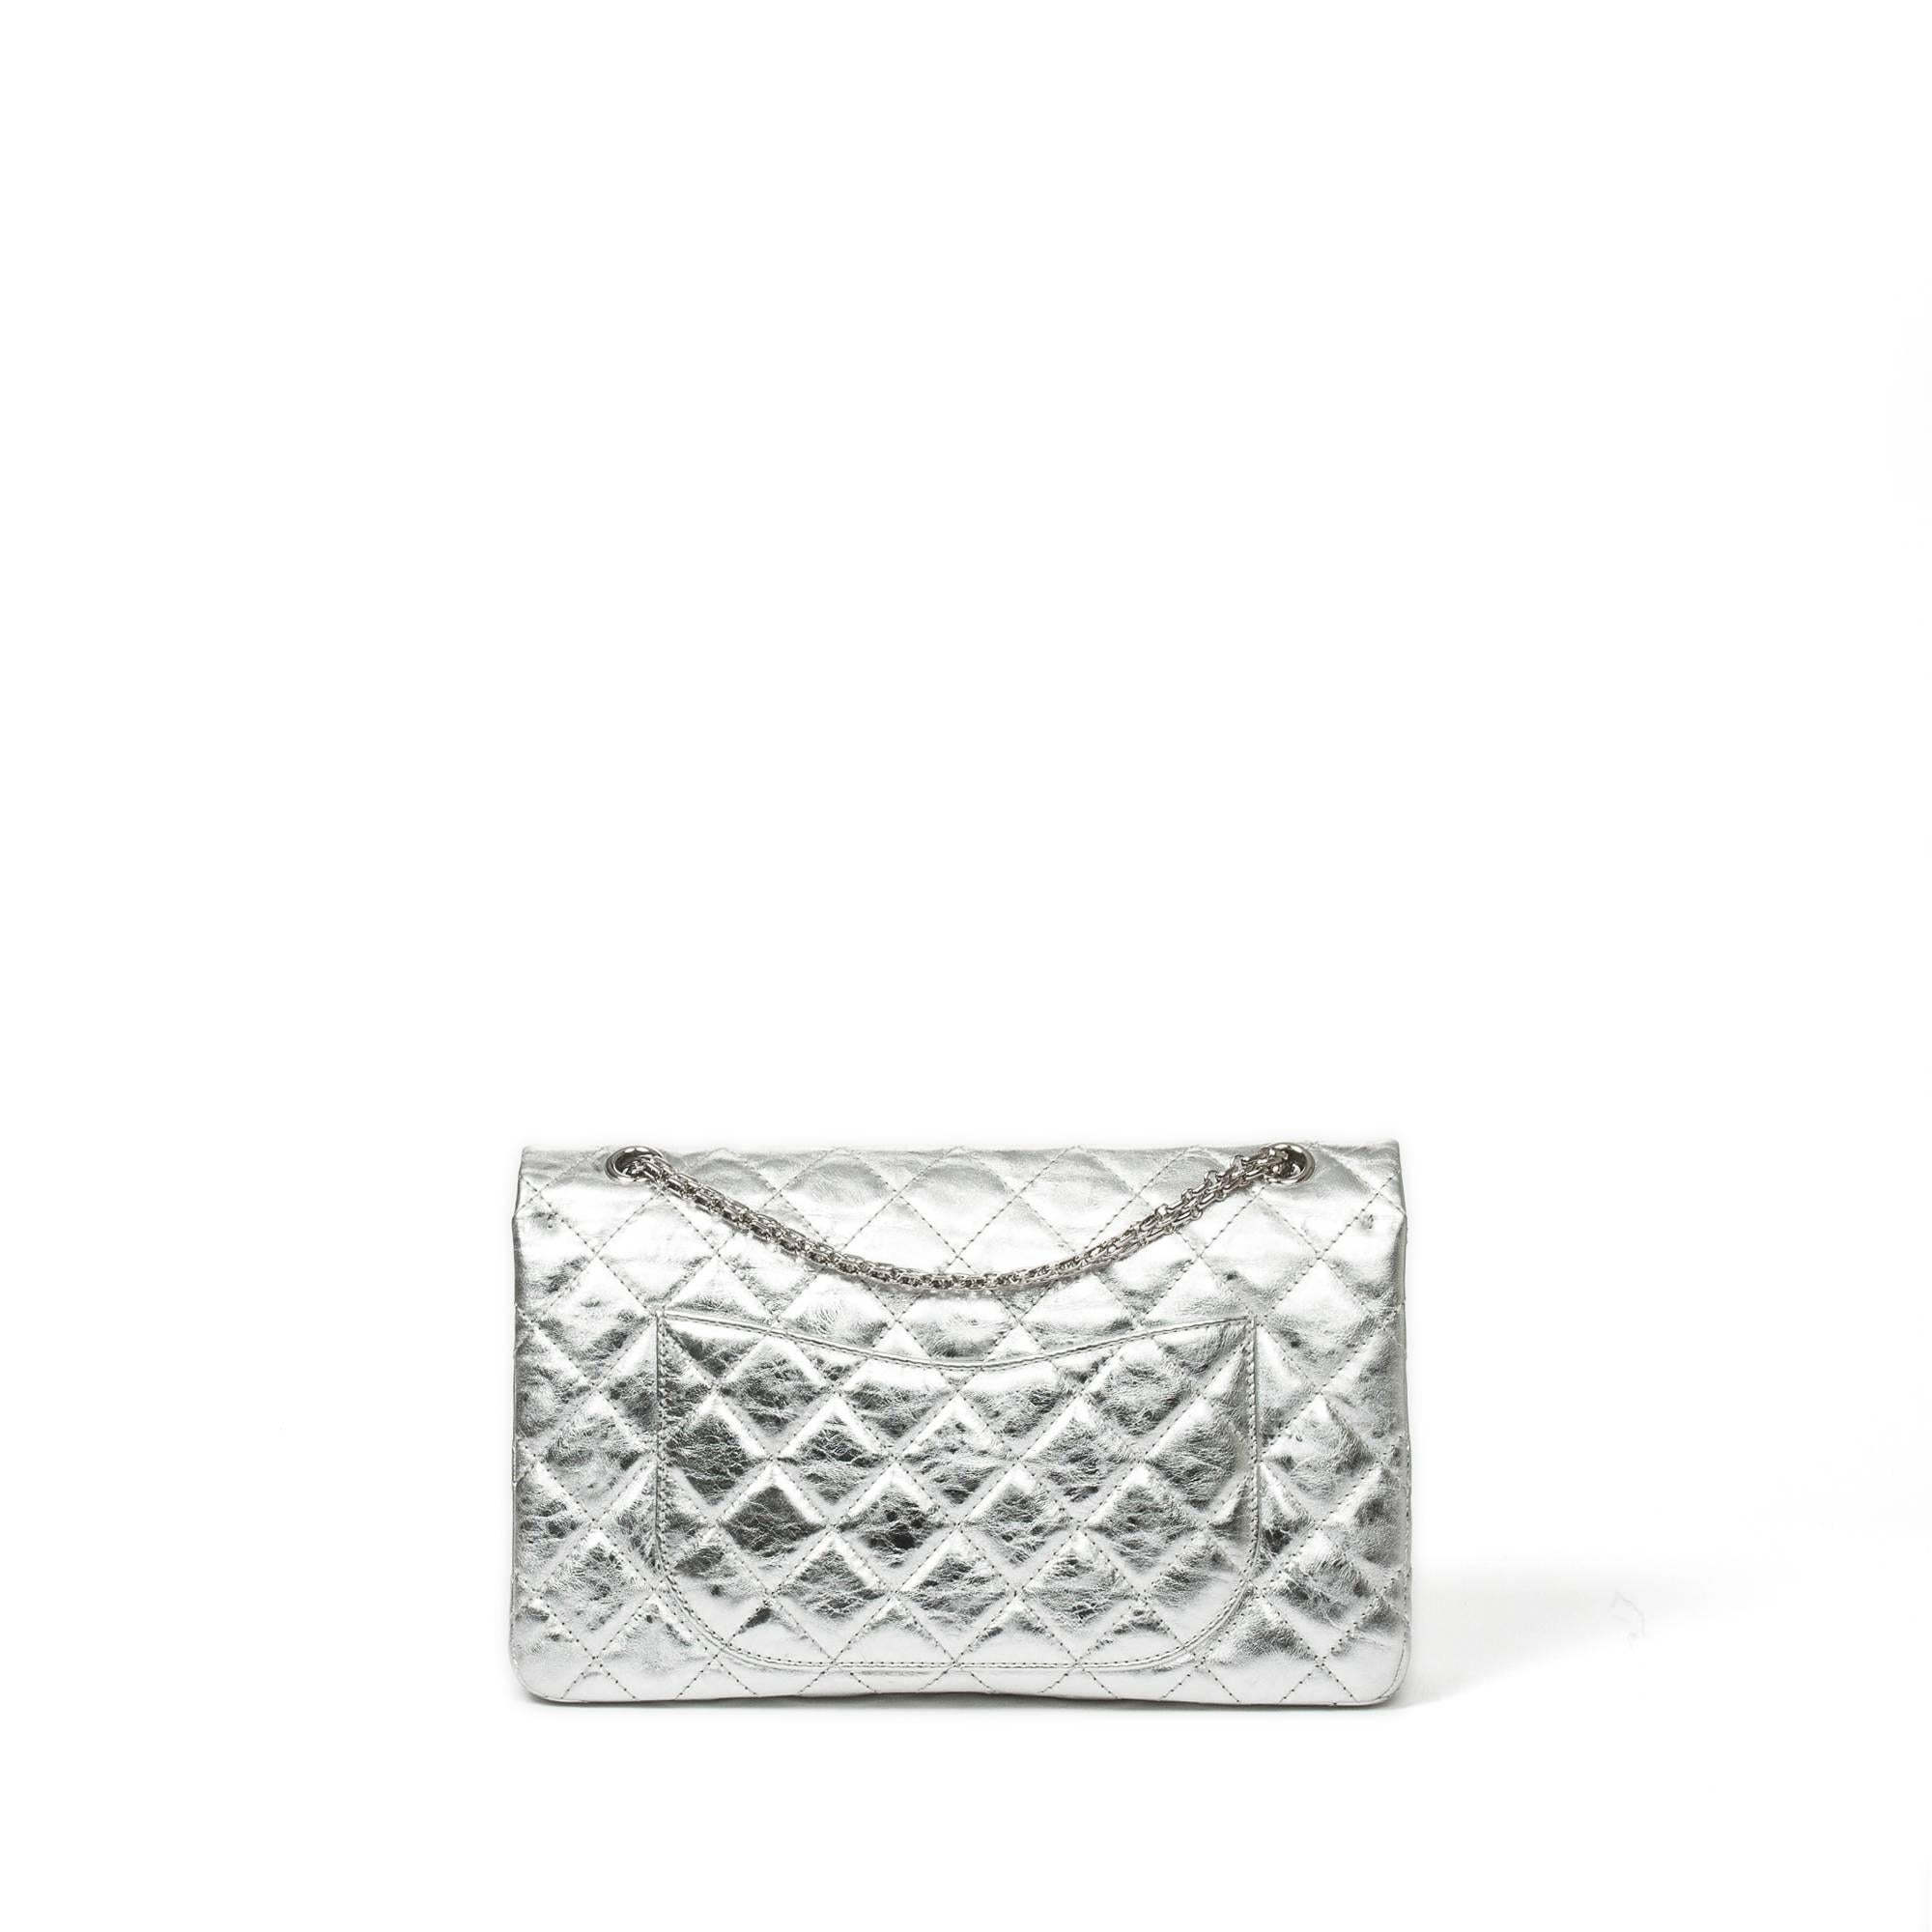 Chanel Reissue Jumbo Double Flap 31cm Quilted Metallic Silver Leather For Sale 1